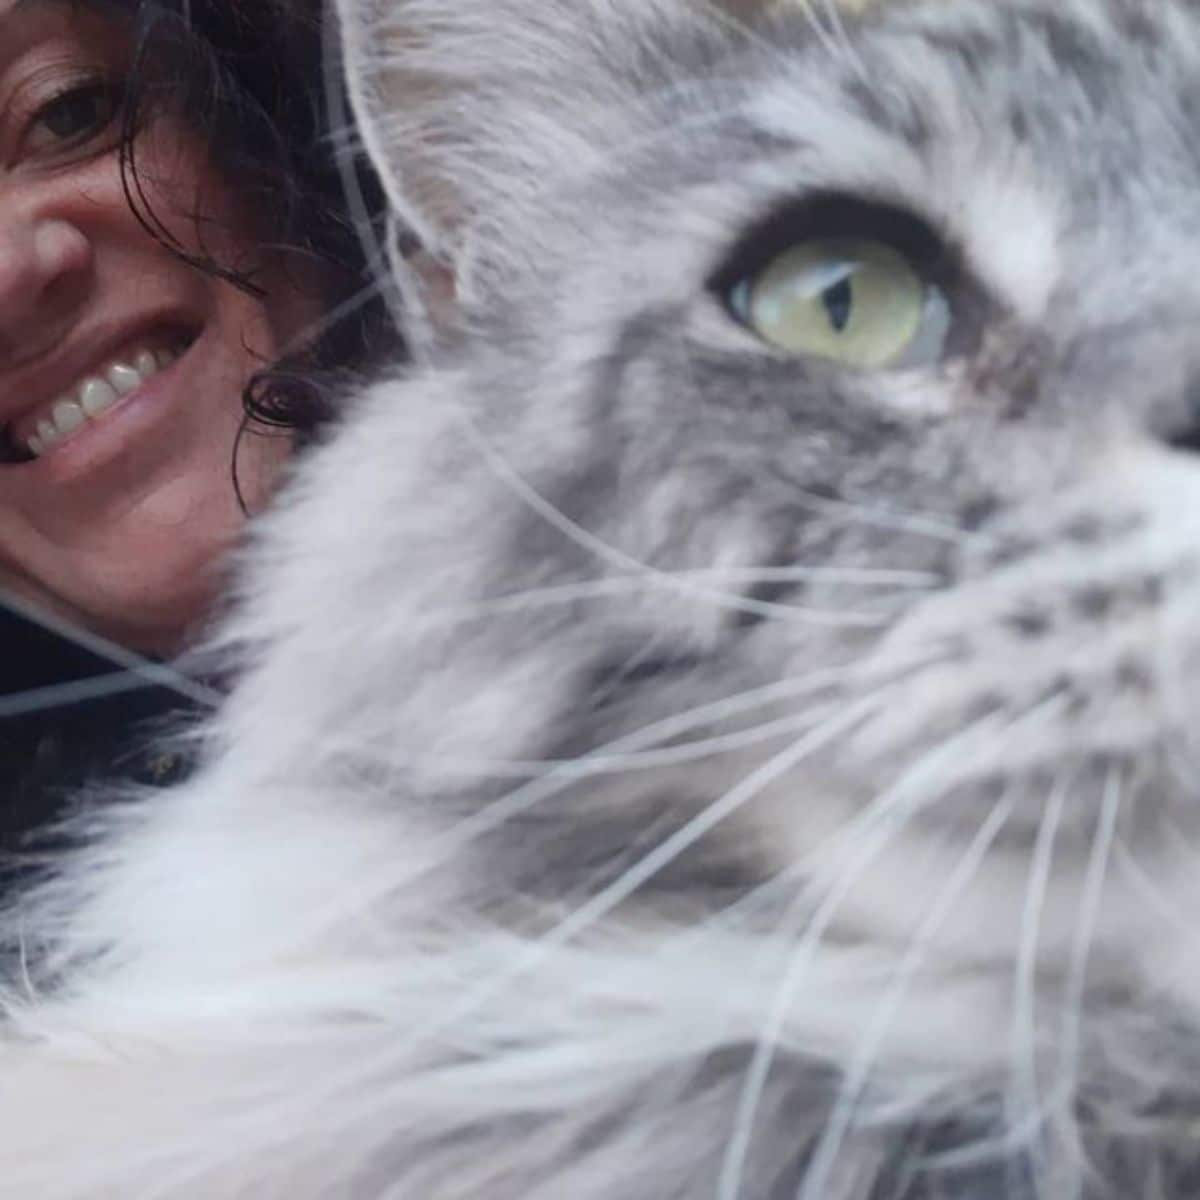 A silver maine coon photobombing a owner's selfie.